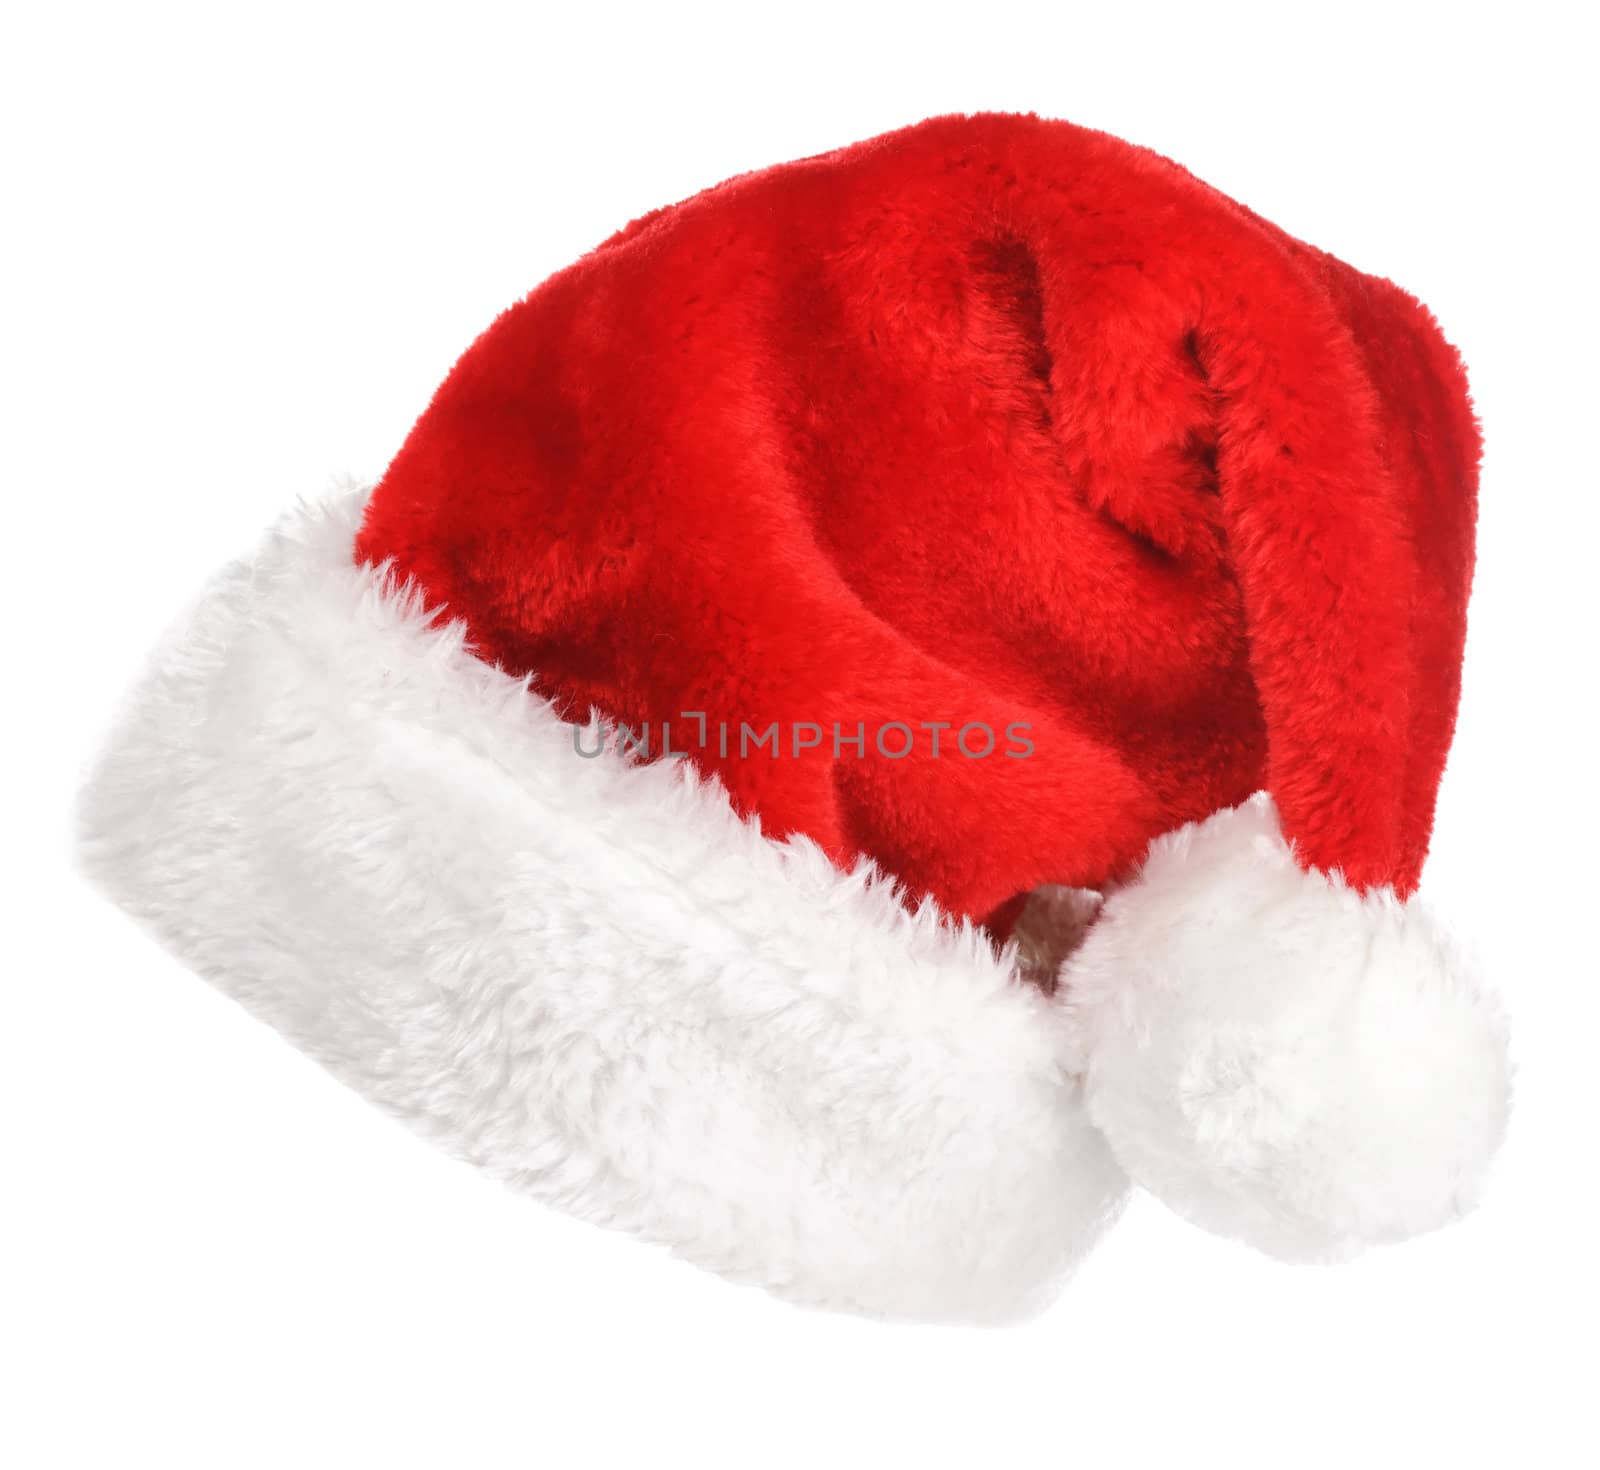 Santa red hat isolated in white background